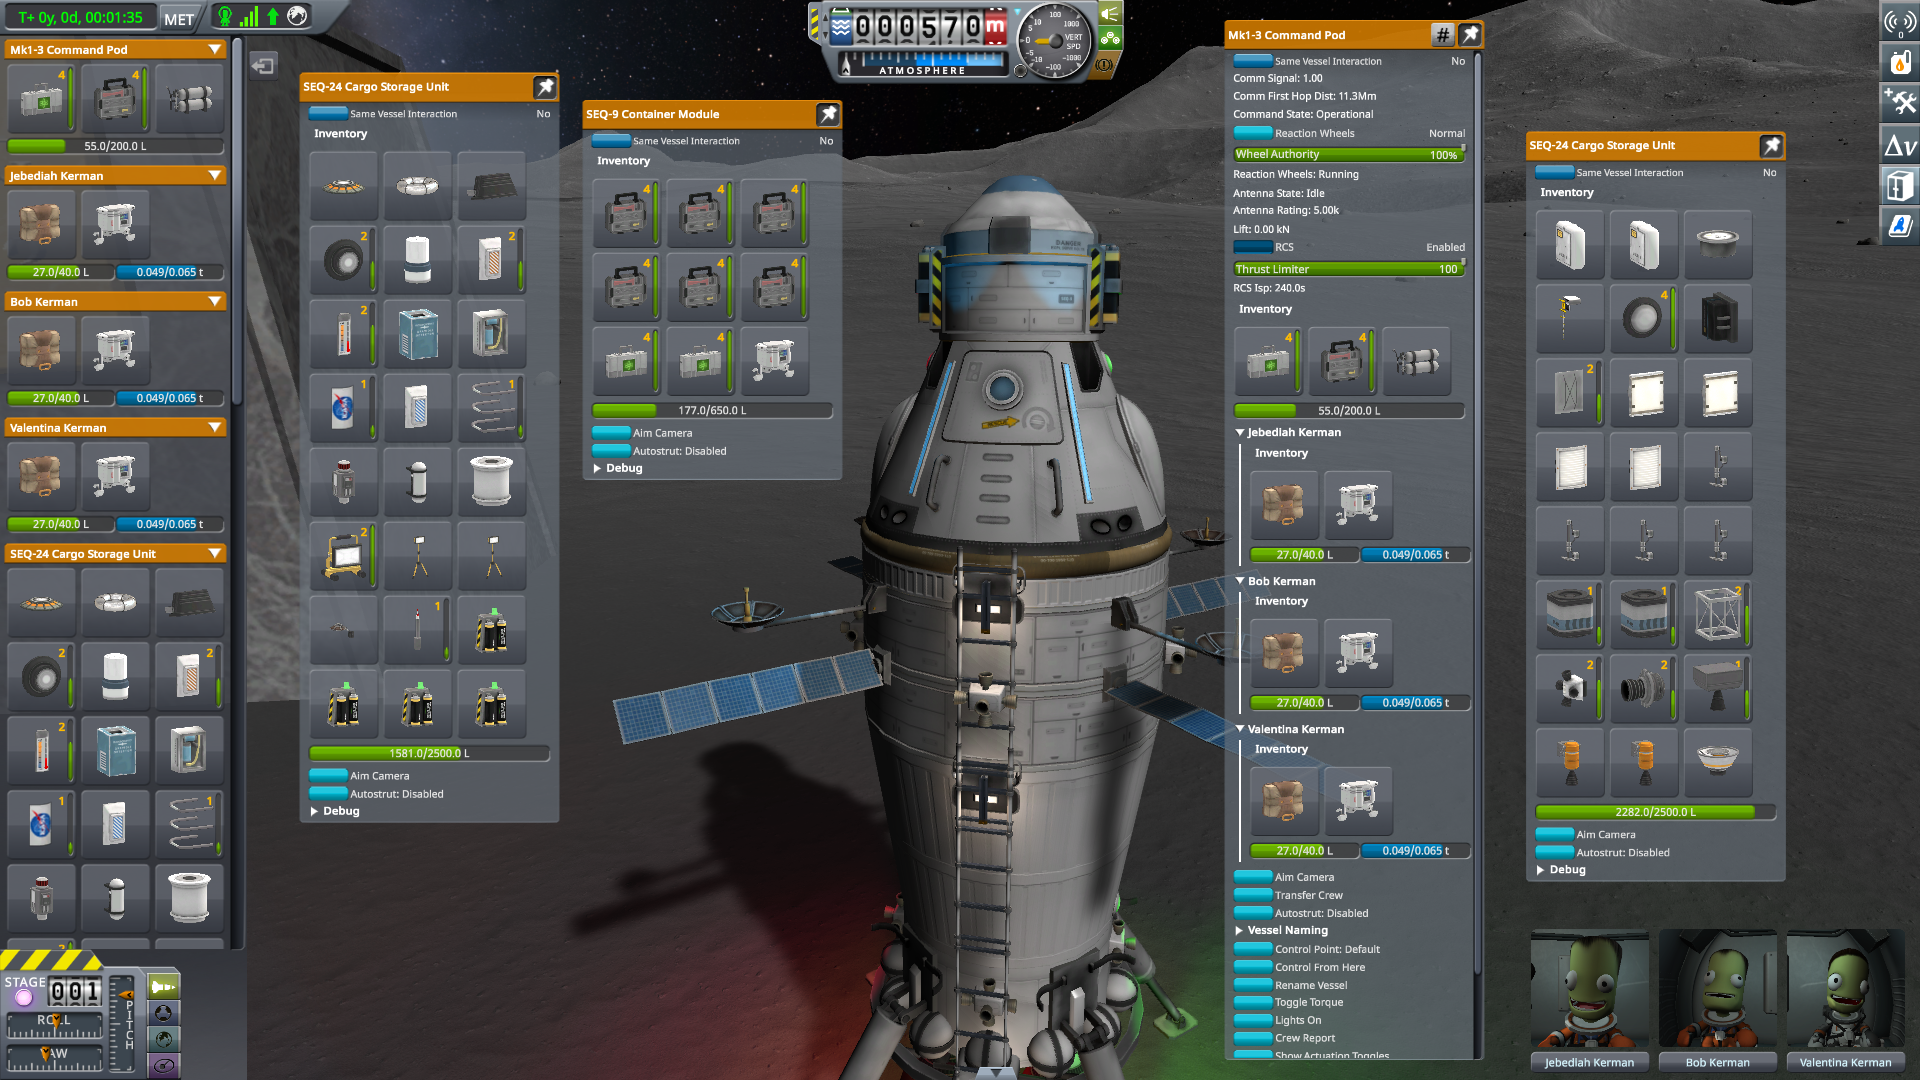 Blind mulighed Lånte Kerbal Space Program 1.11: "Some Reassembly Required" is now available! ·  Kerbal Space Program update for 17 December 2020 · SteamDB